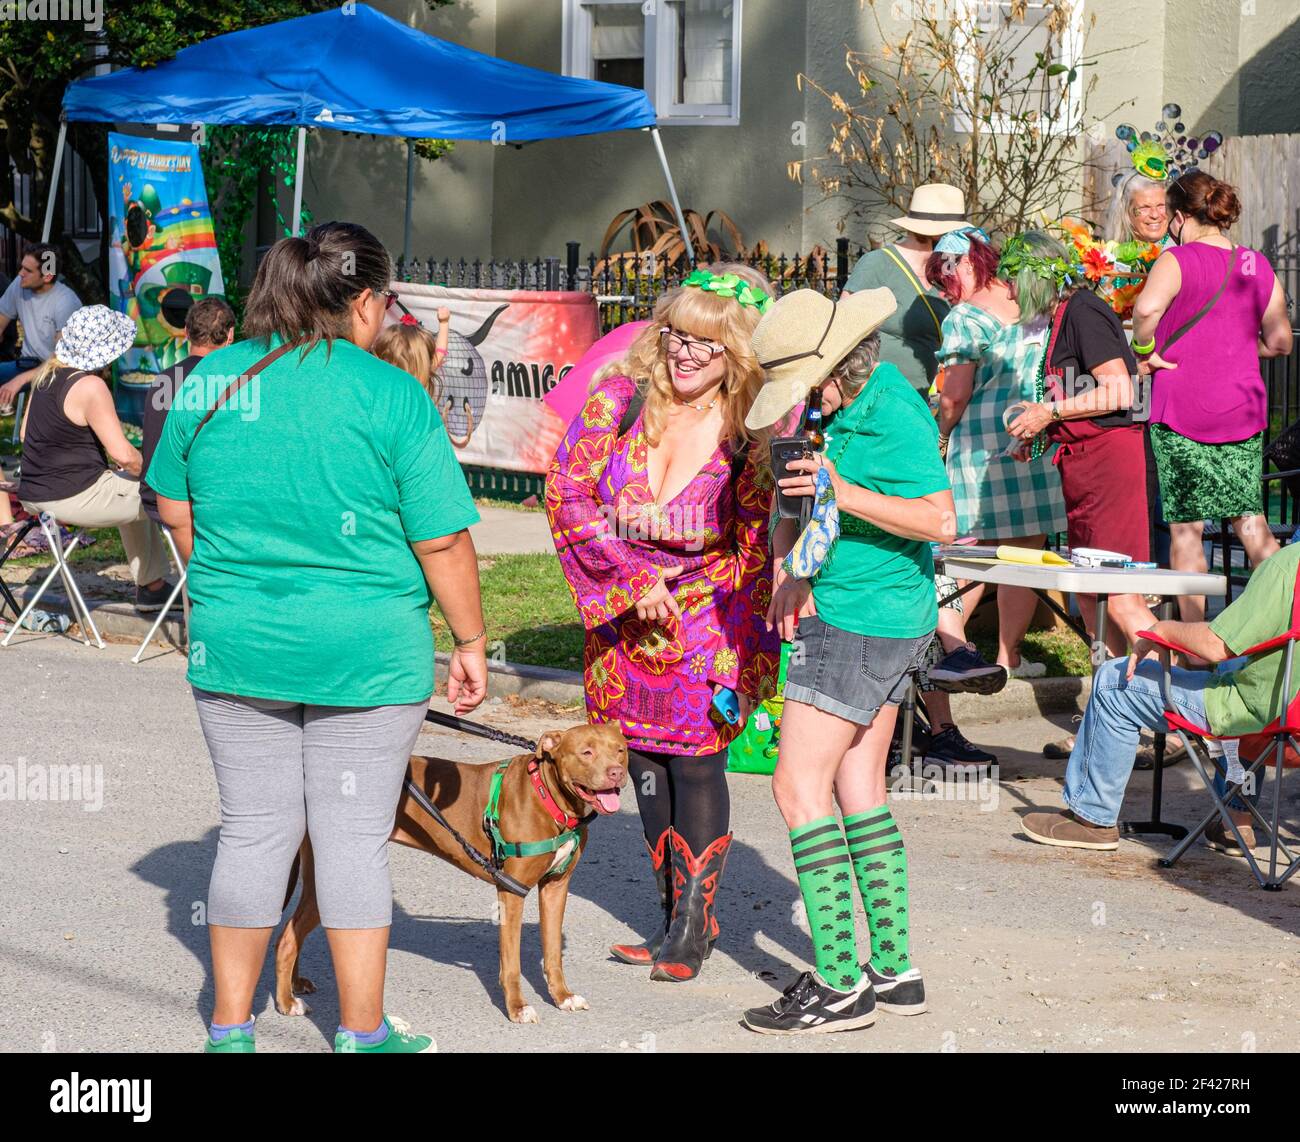 NEW ORLEANS, LA, USA - MARCH 13, 2021: Uptown neighborhood celebrating St. Patrick's day with block party Stock Photo